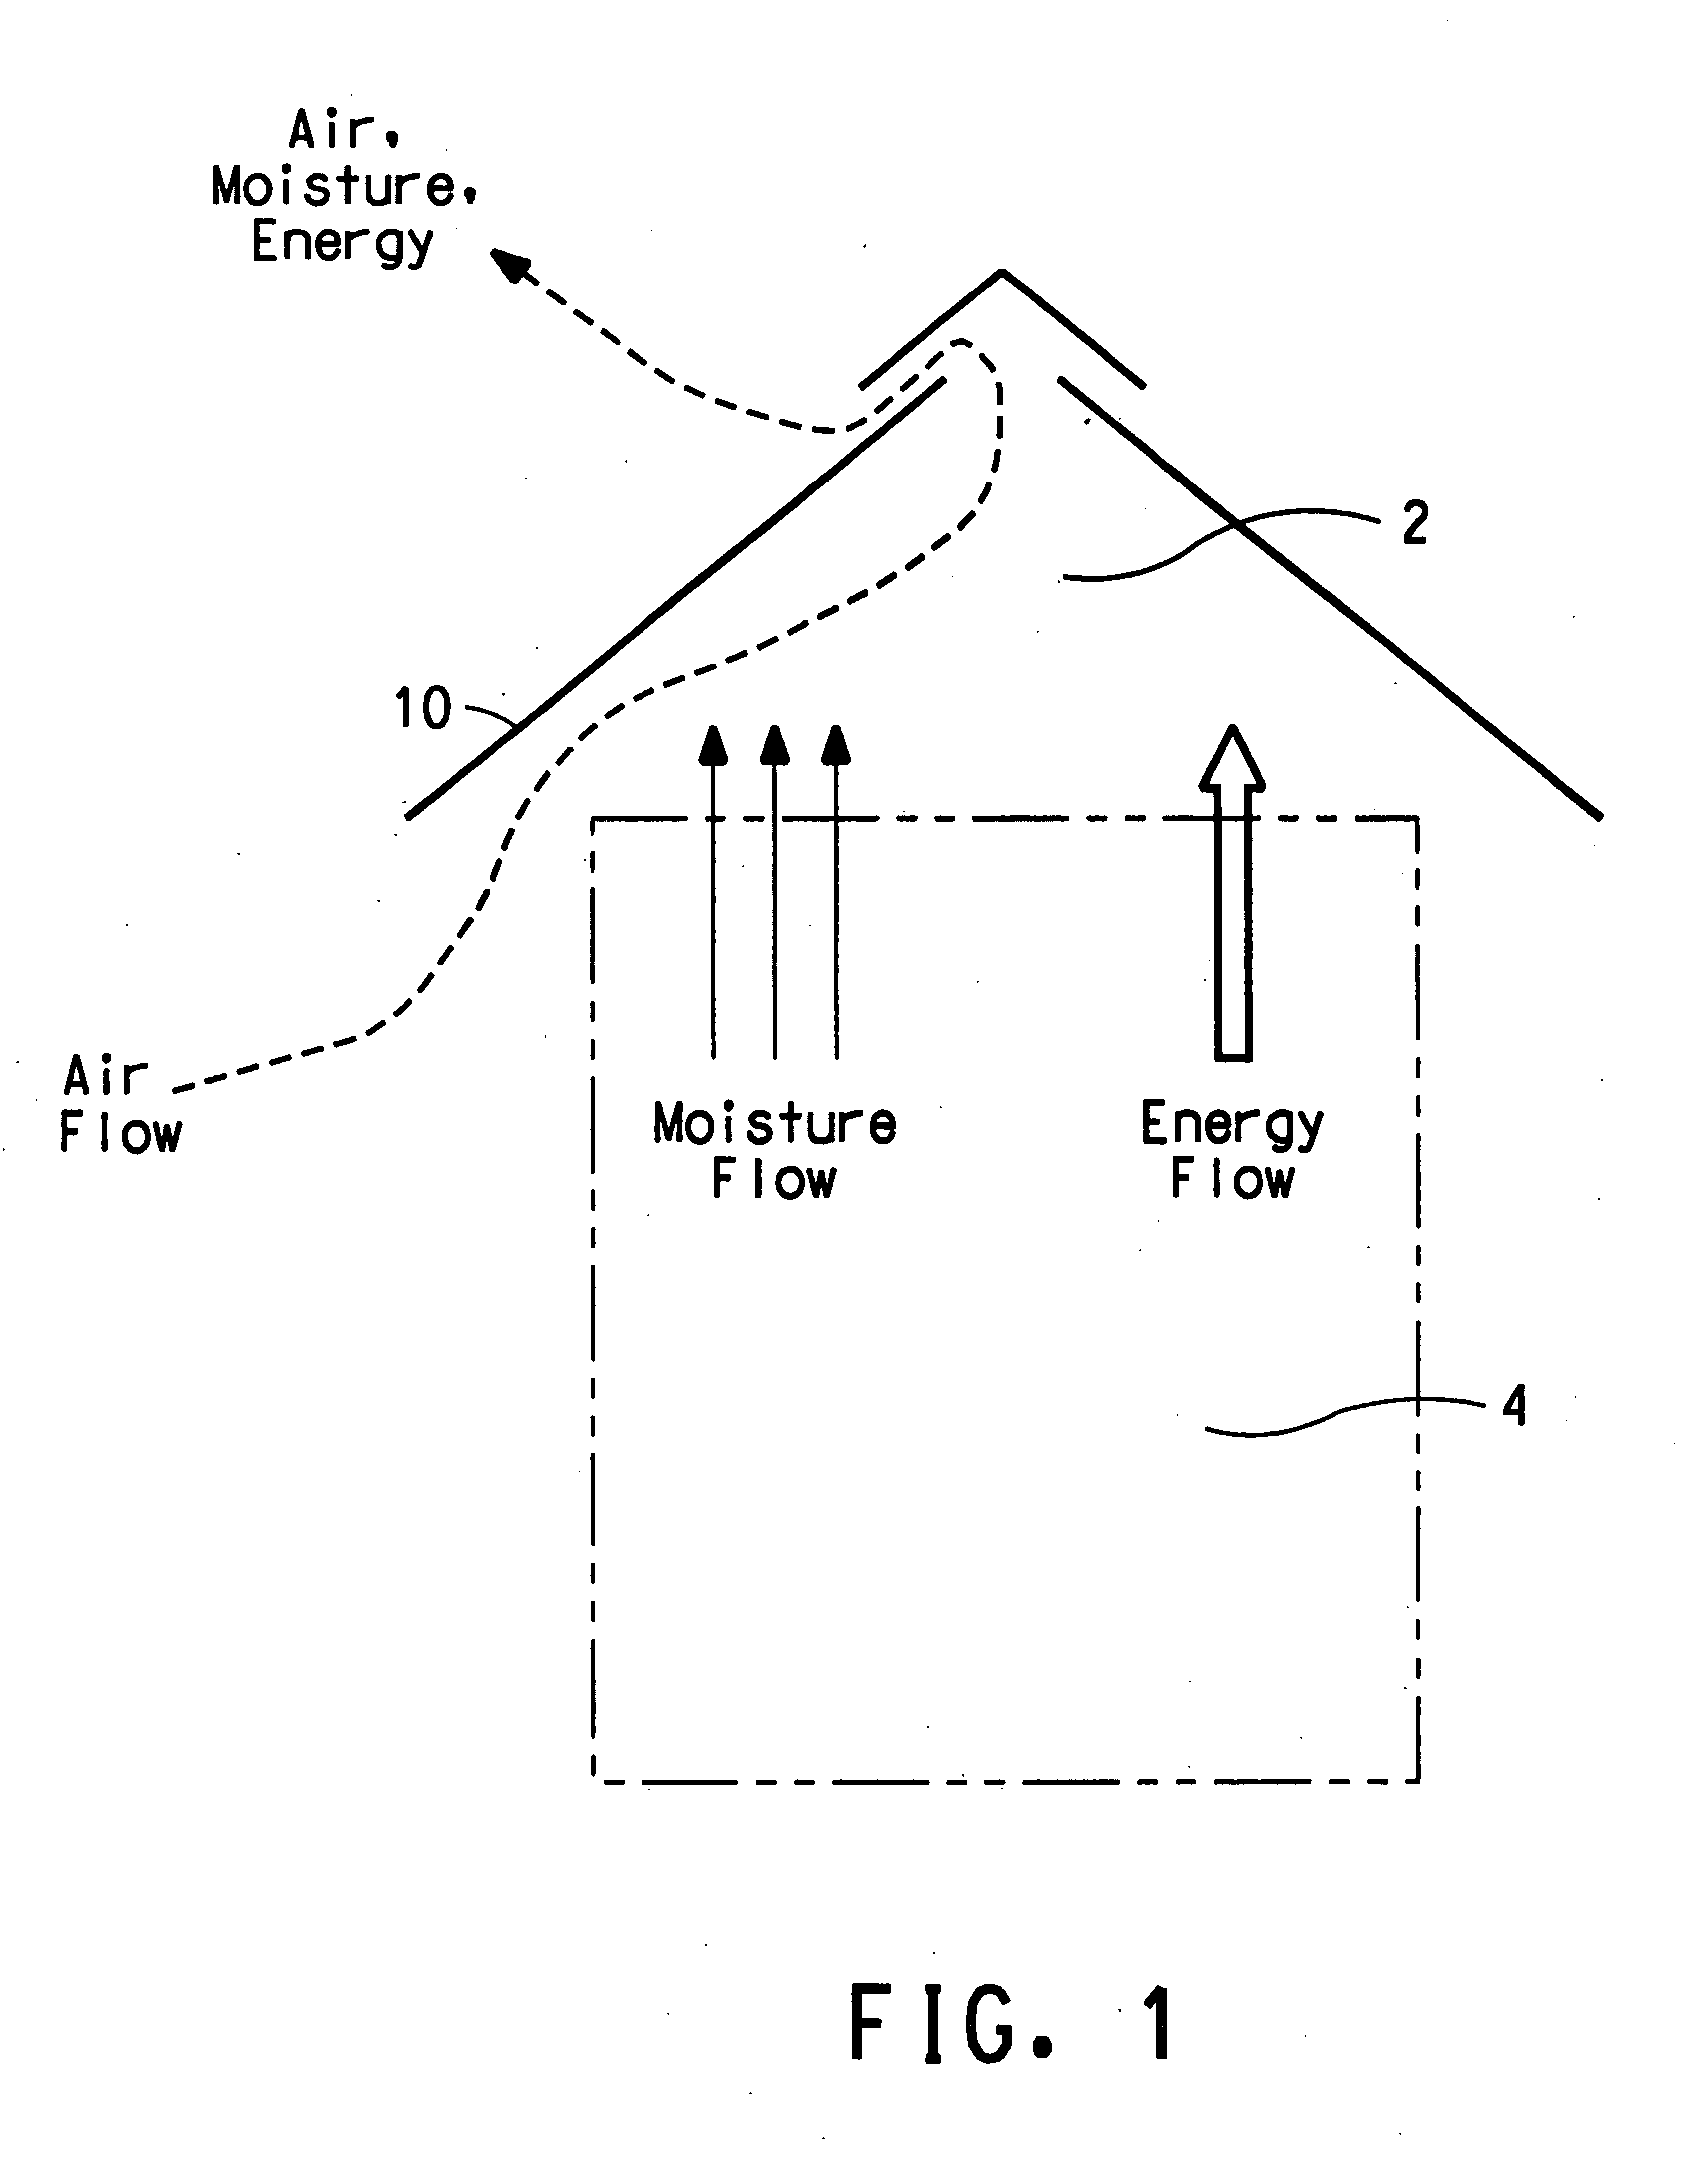 Article and method for controlling moisture